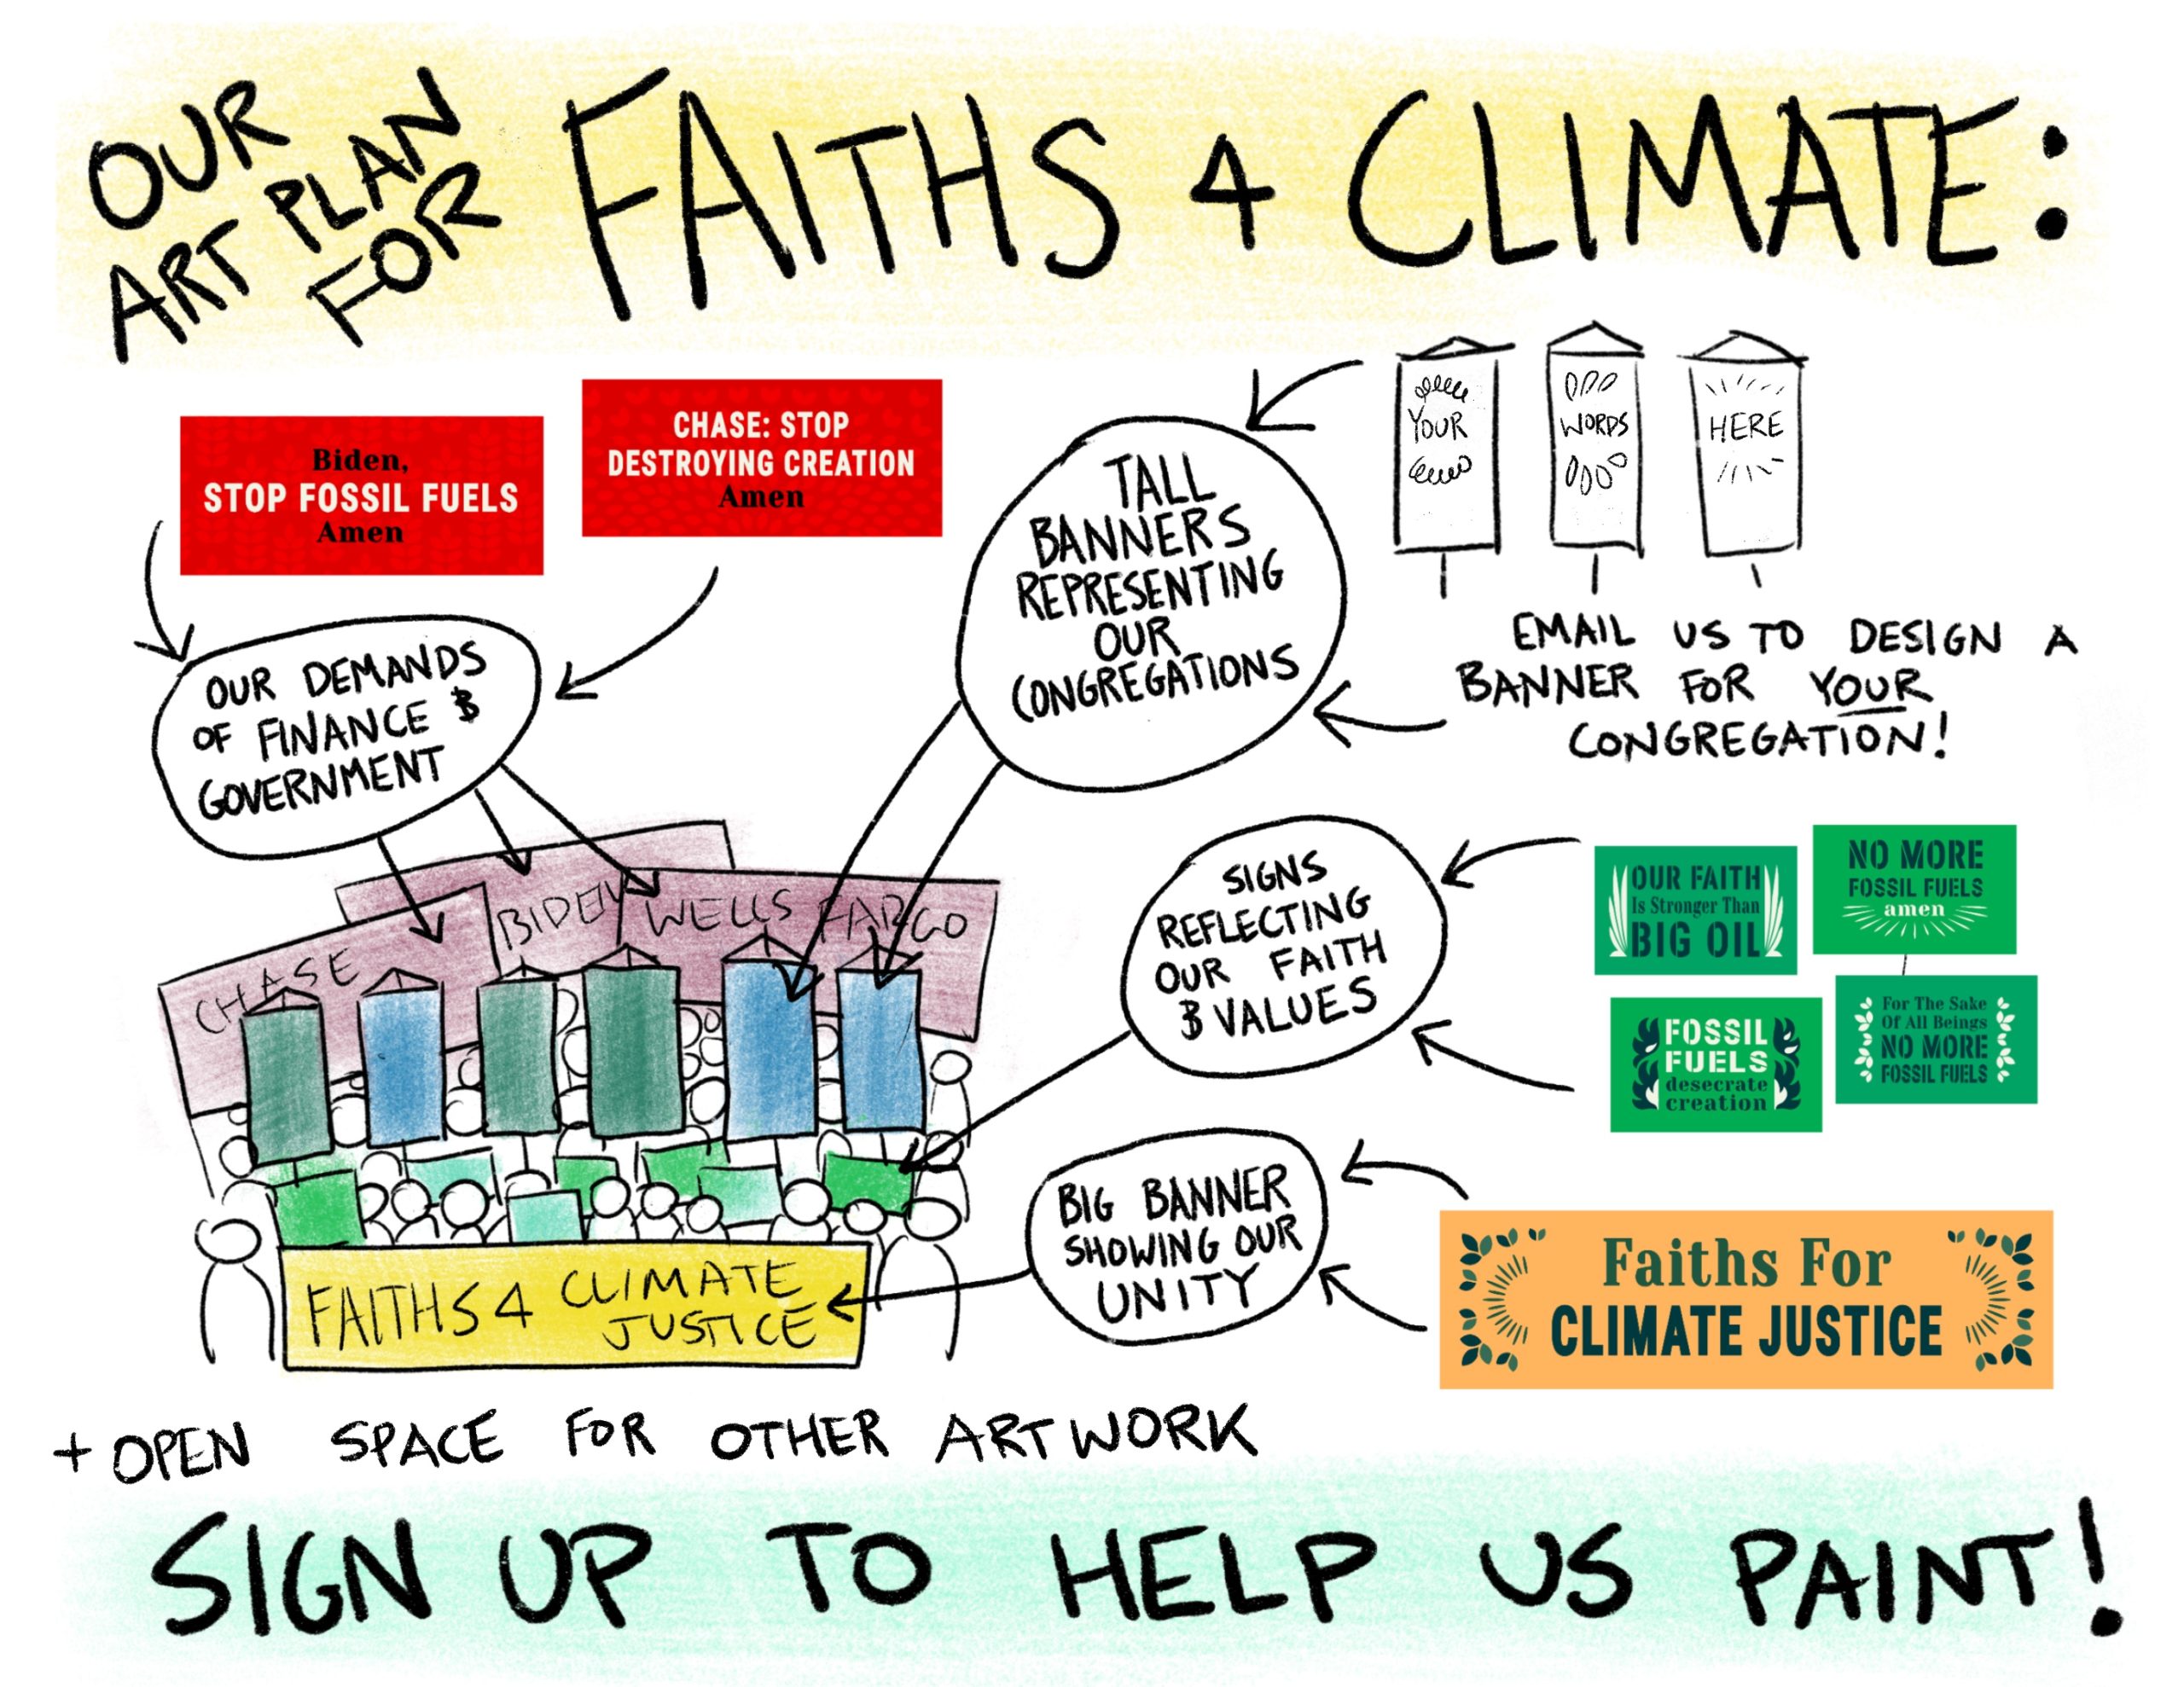 Join GreenFaith for “Art and Action” Sept. 25-27